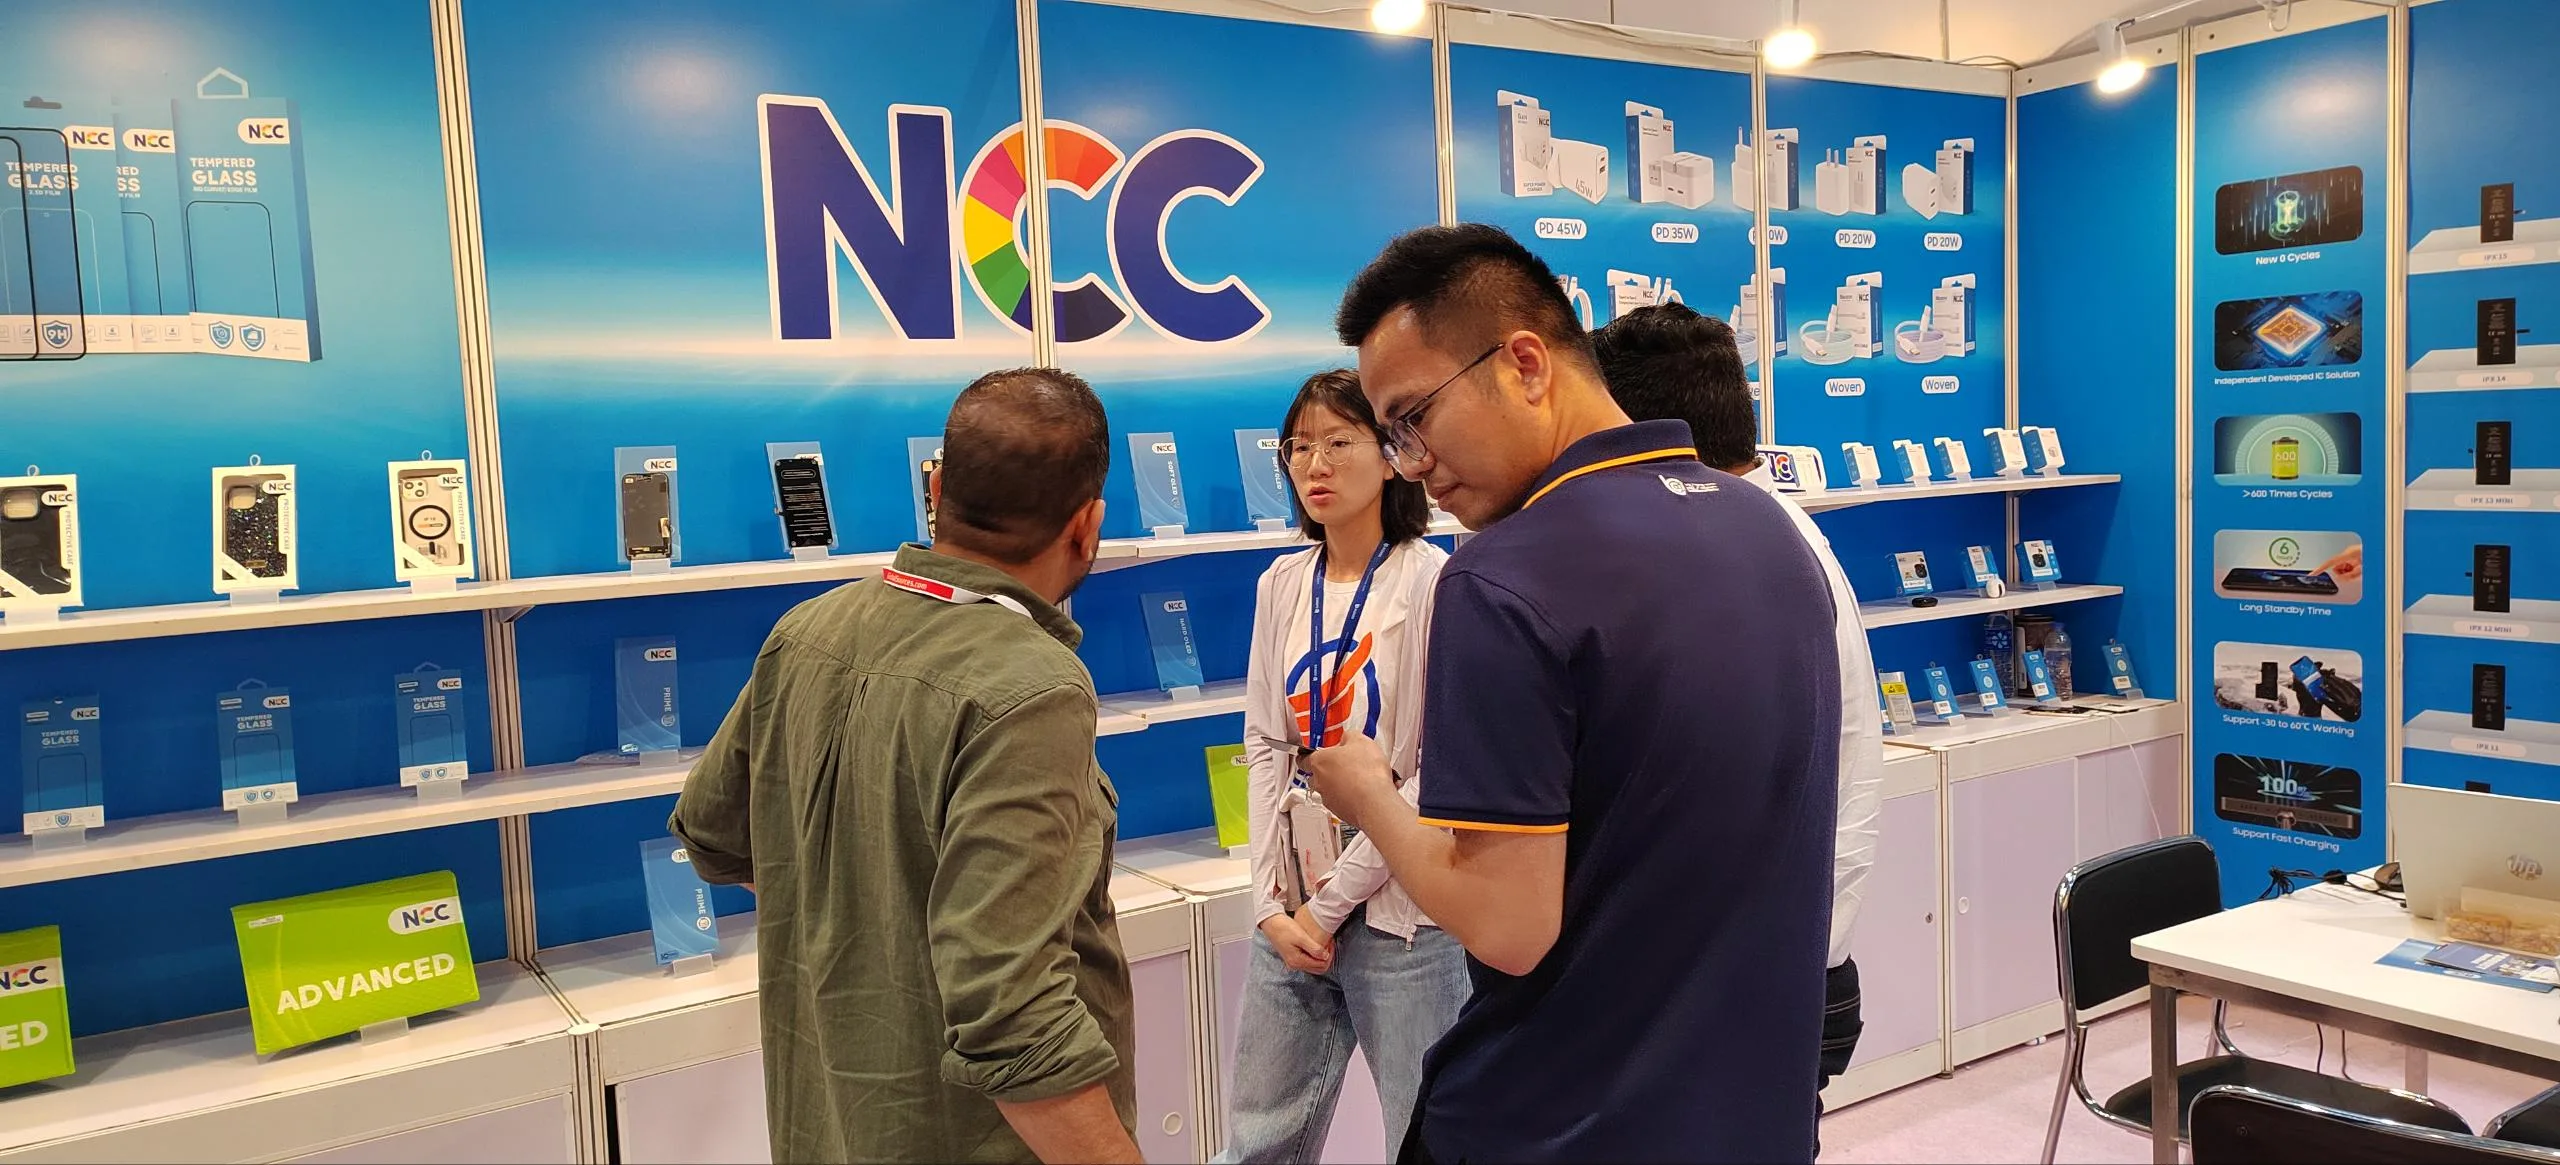 NCC presents latest offerings and establish valuable connections and explore new business opportunities.